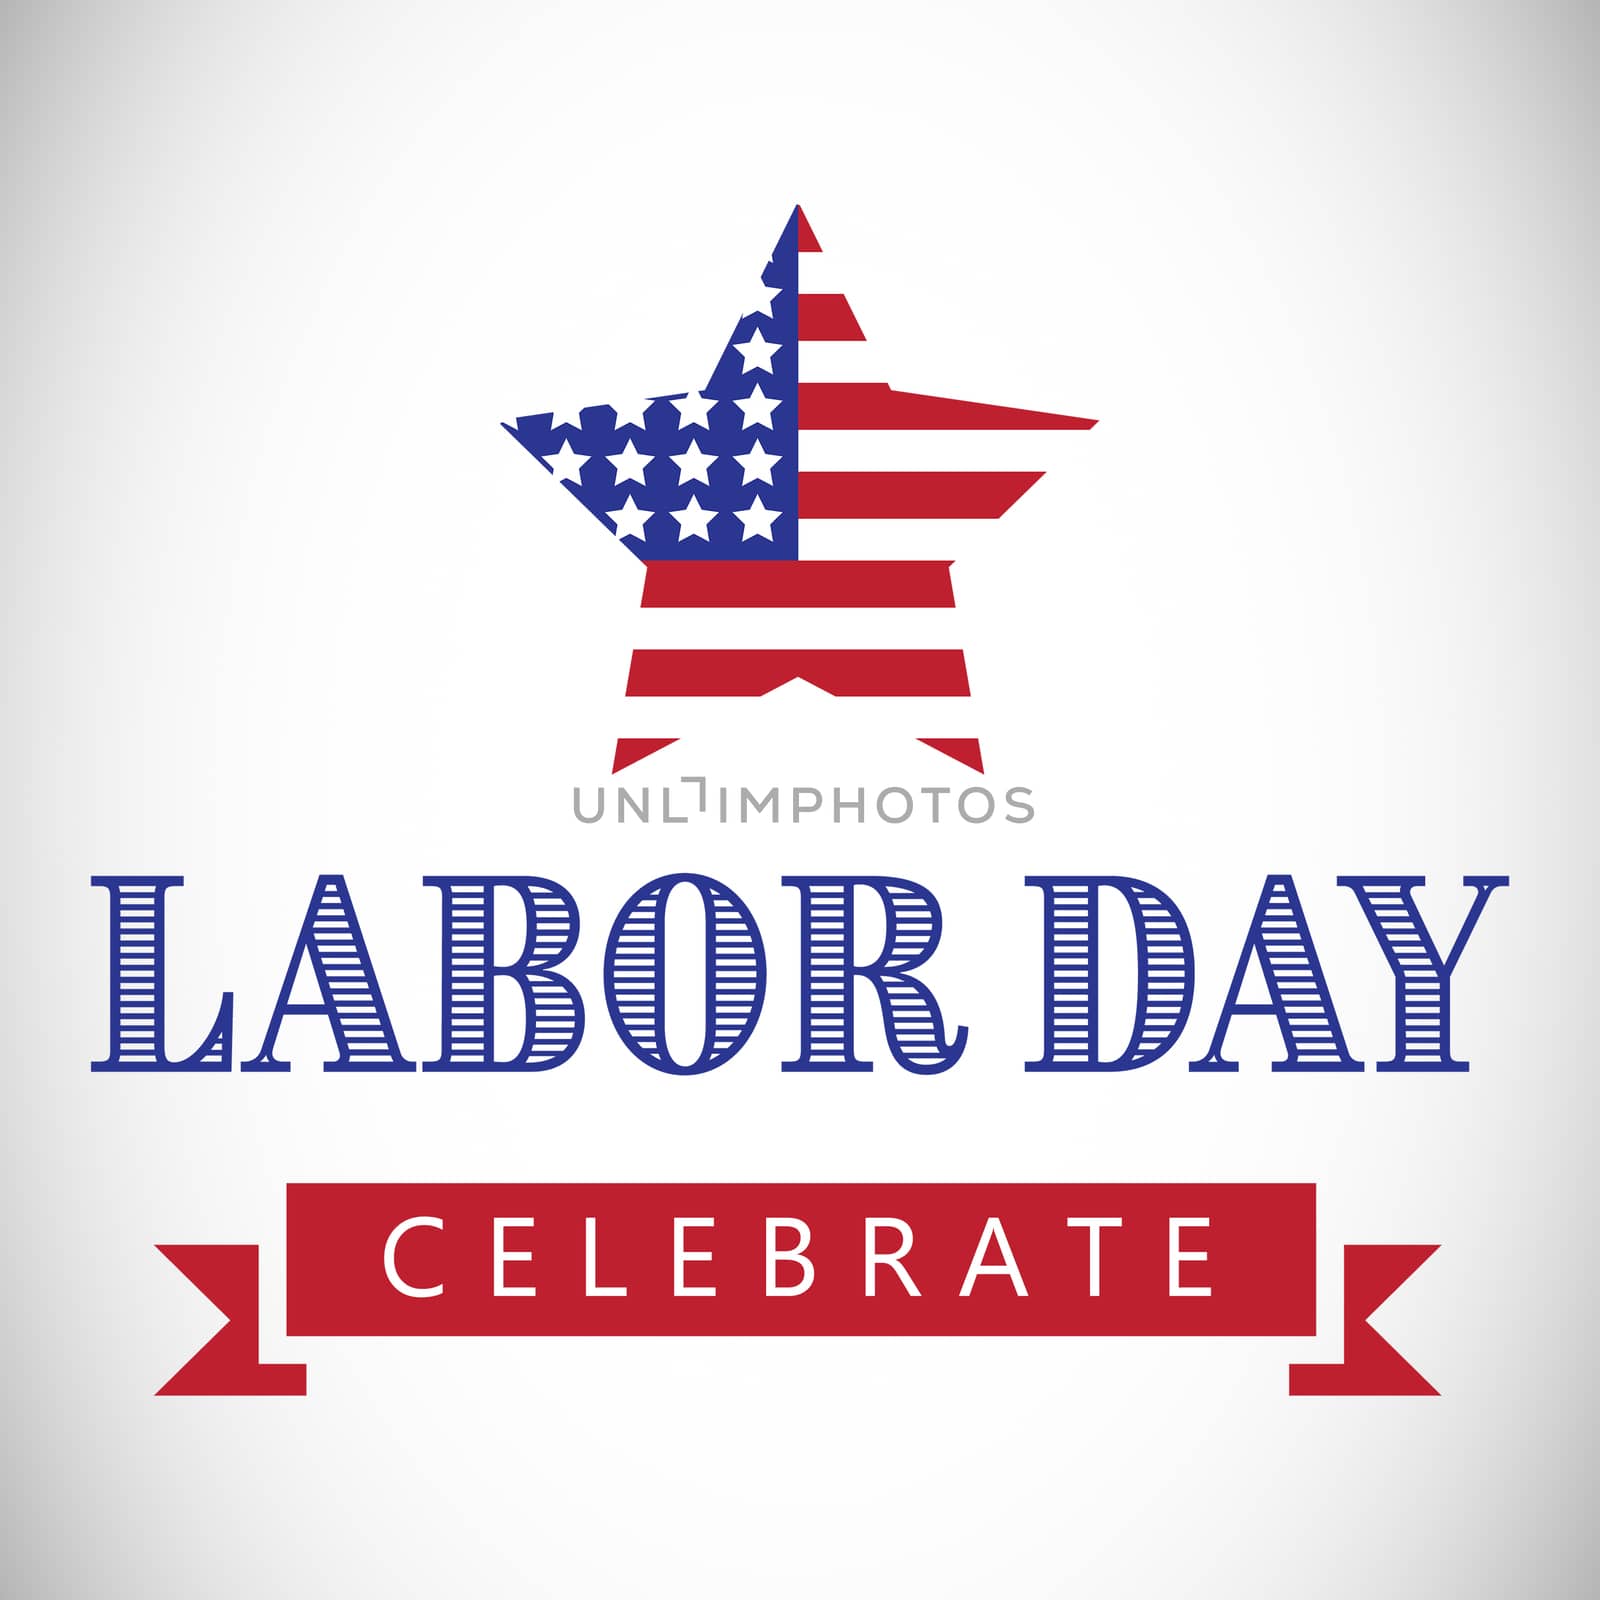 Labor day celebrate text and star shape American flag by Wavebreakmedia